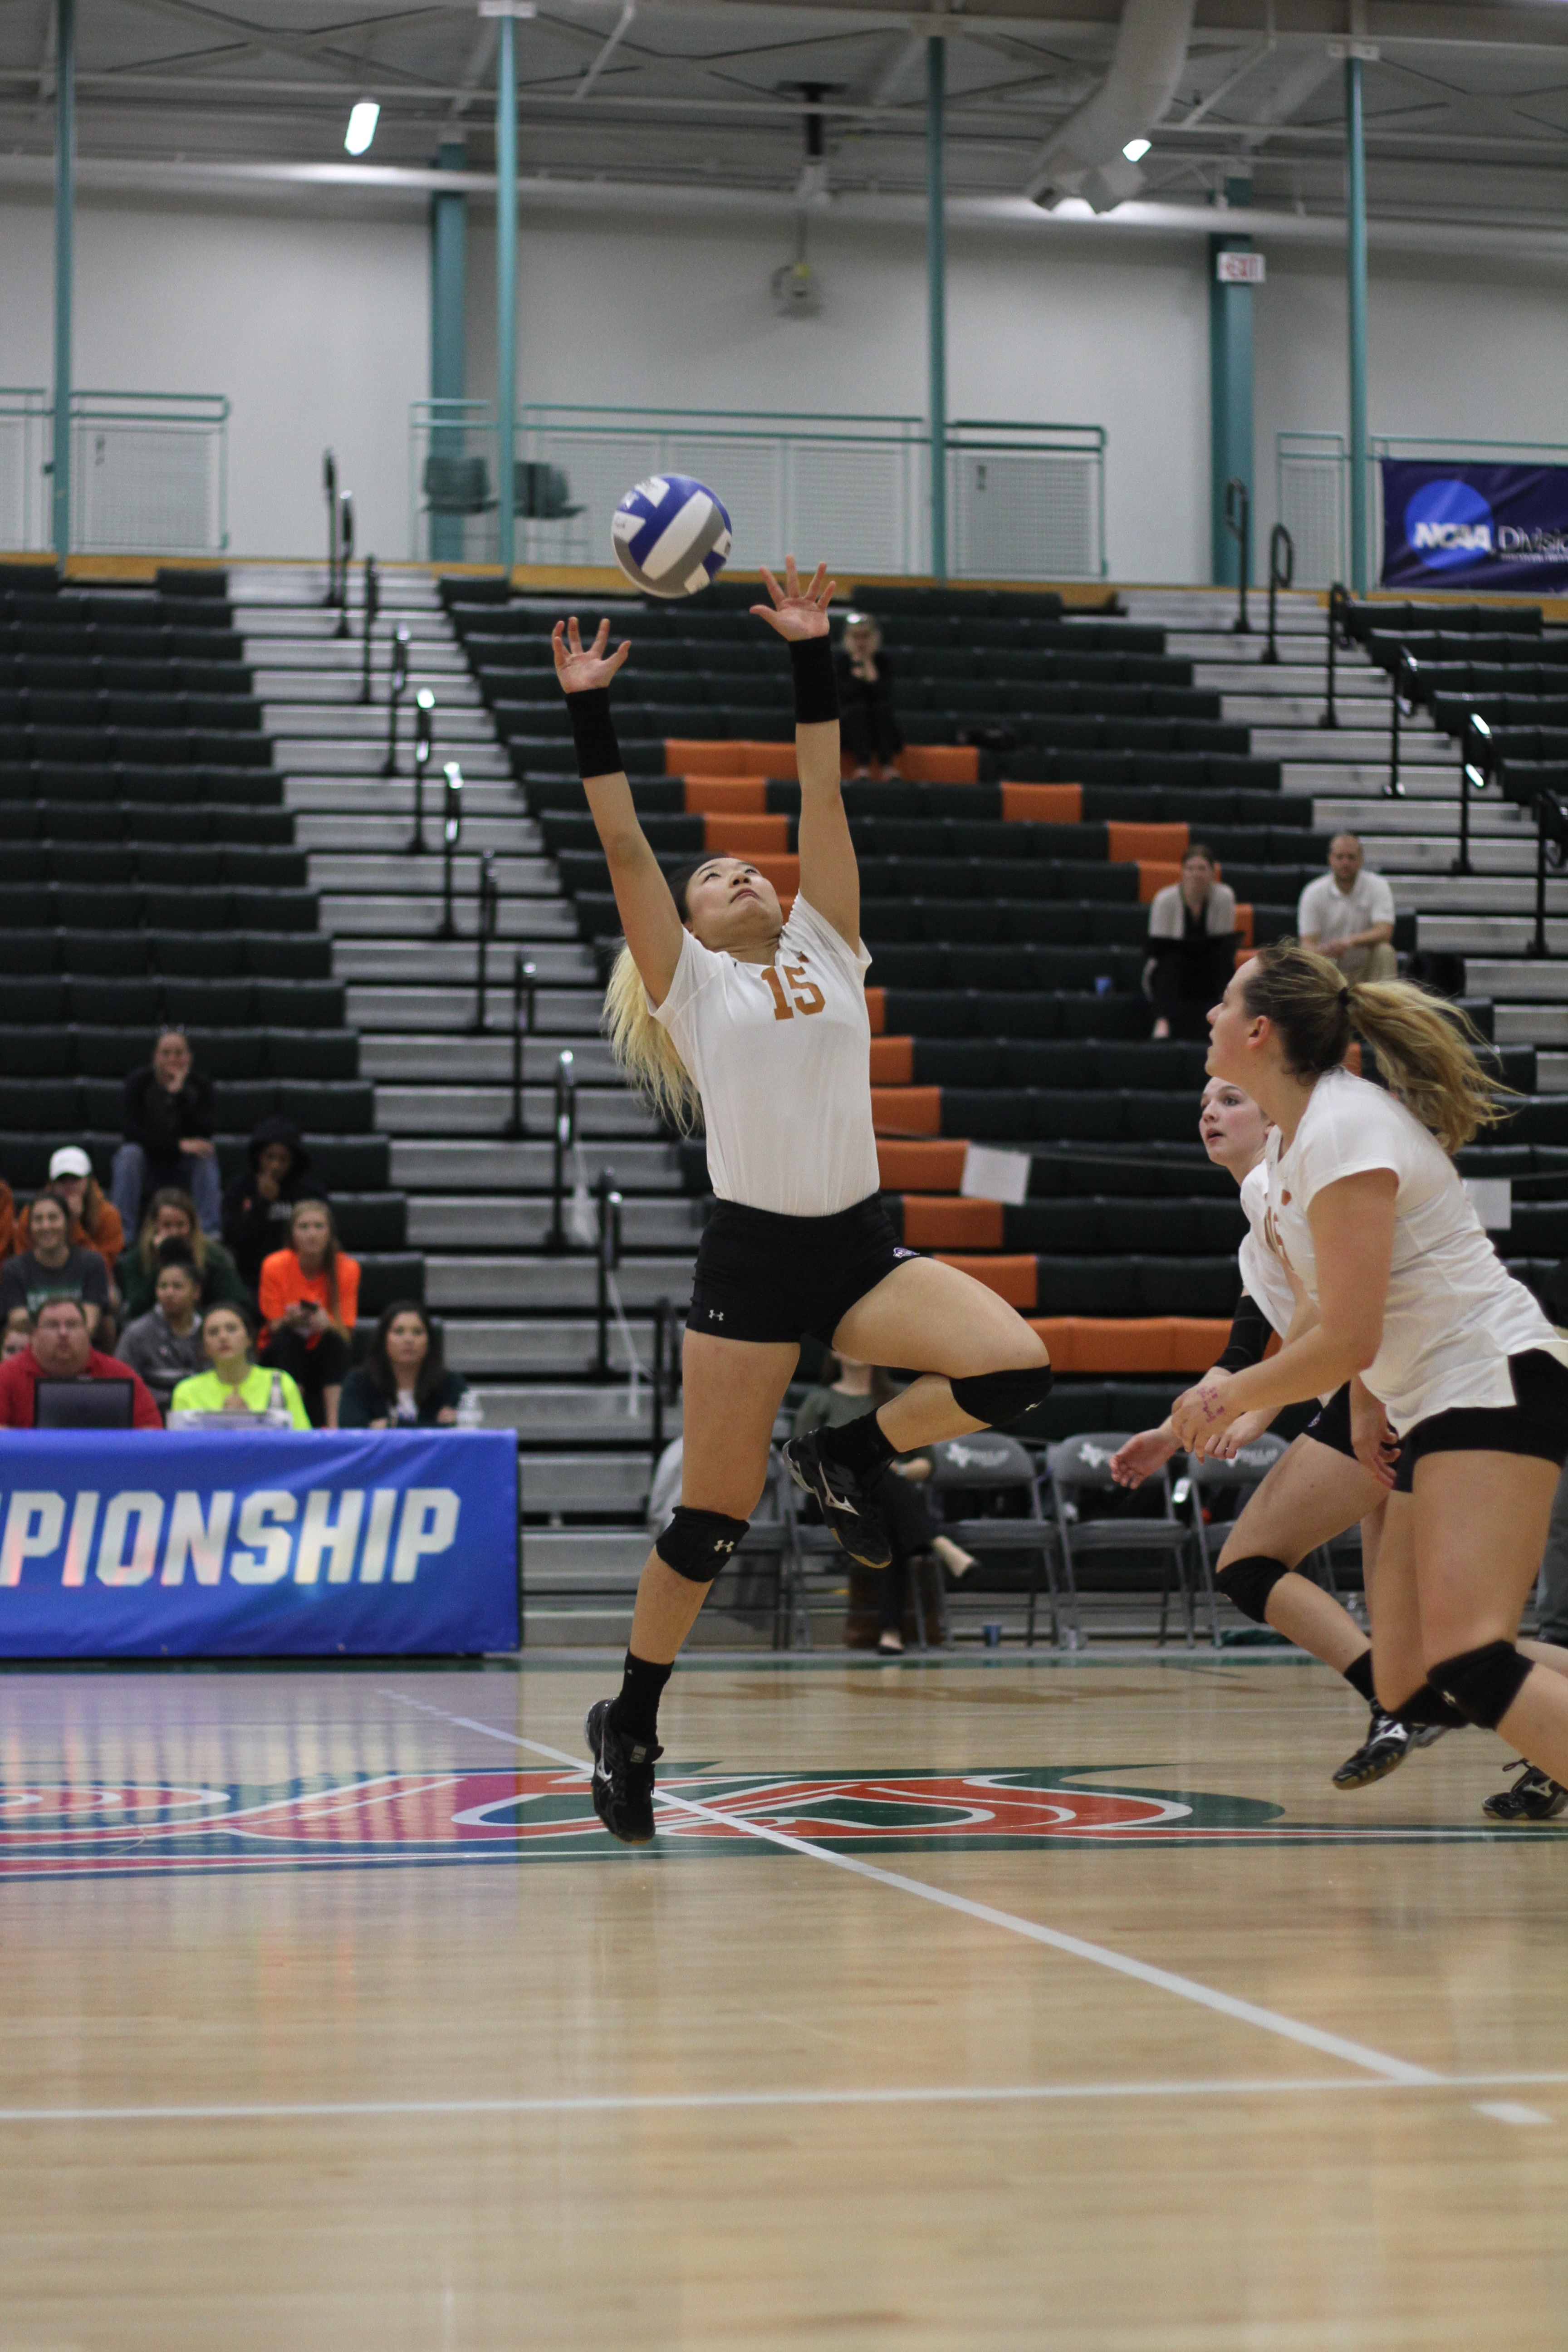 UTD volleyball beats down Whitworth to advance in tourney